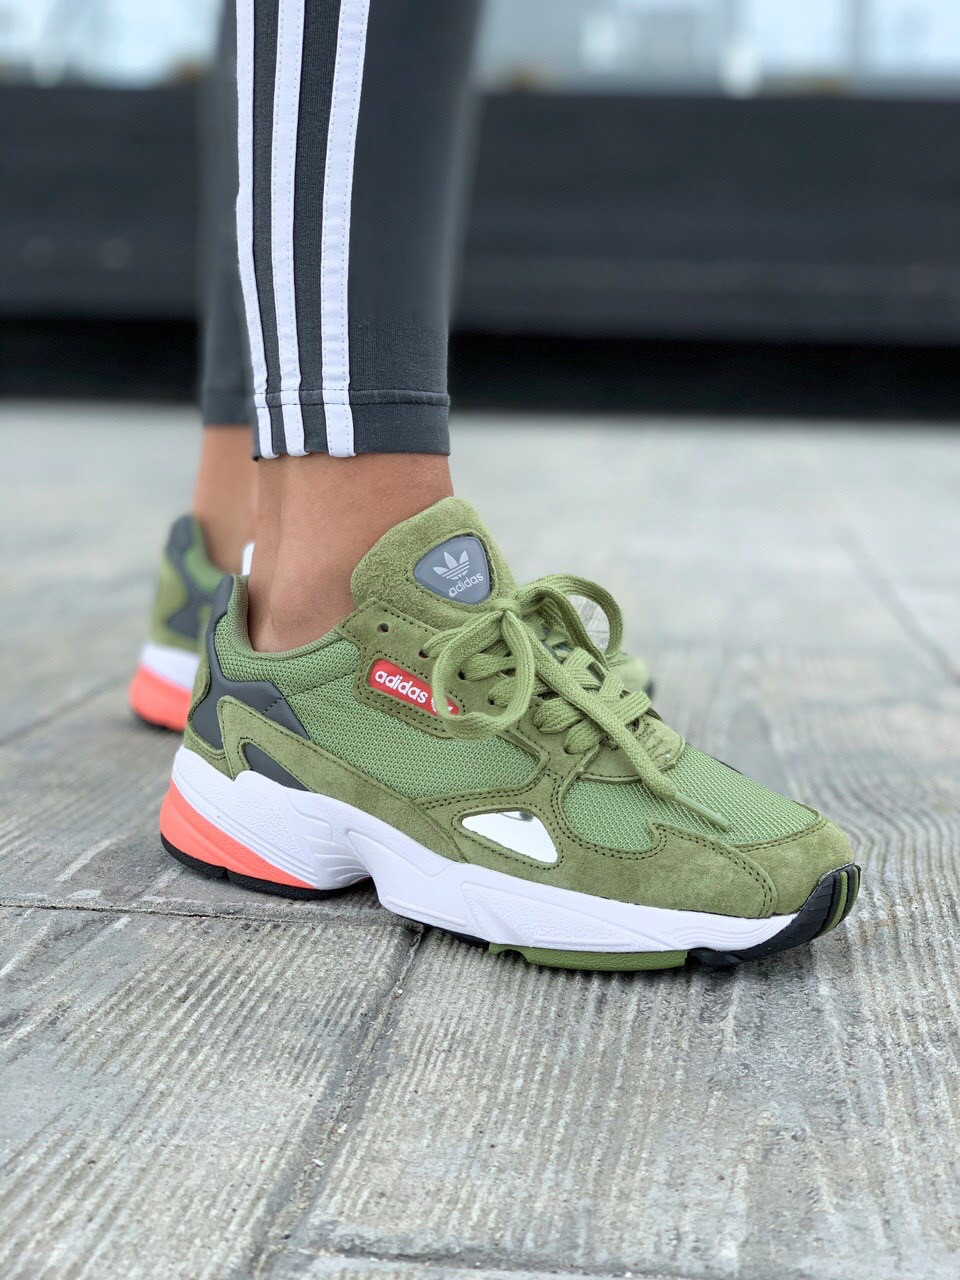 adidas falcon olive green - OFF-64% >Free Delivery